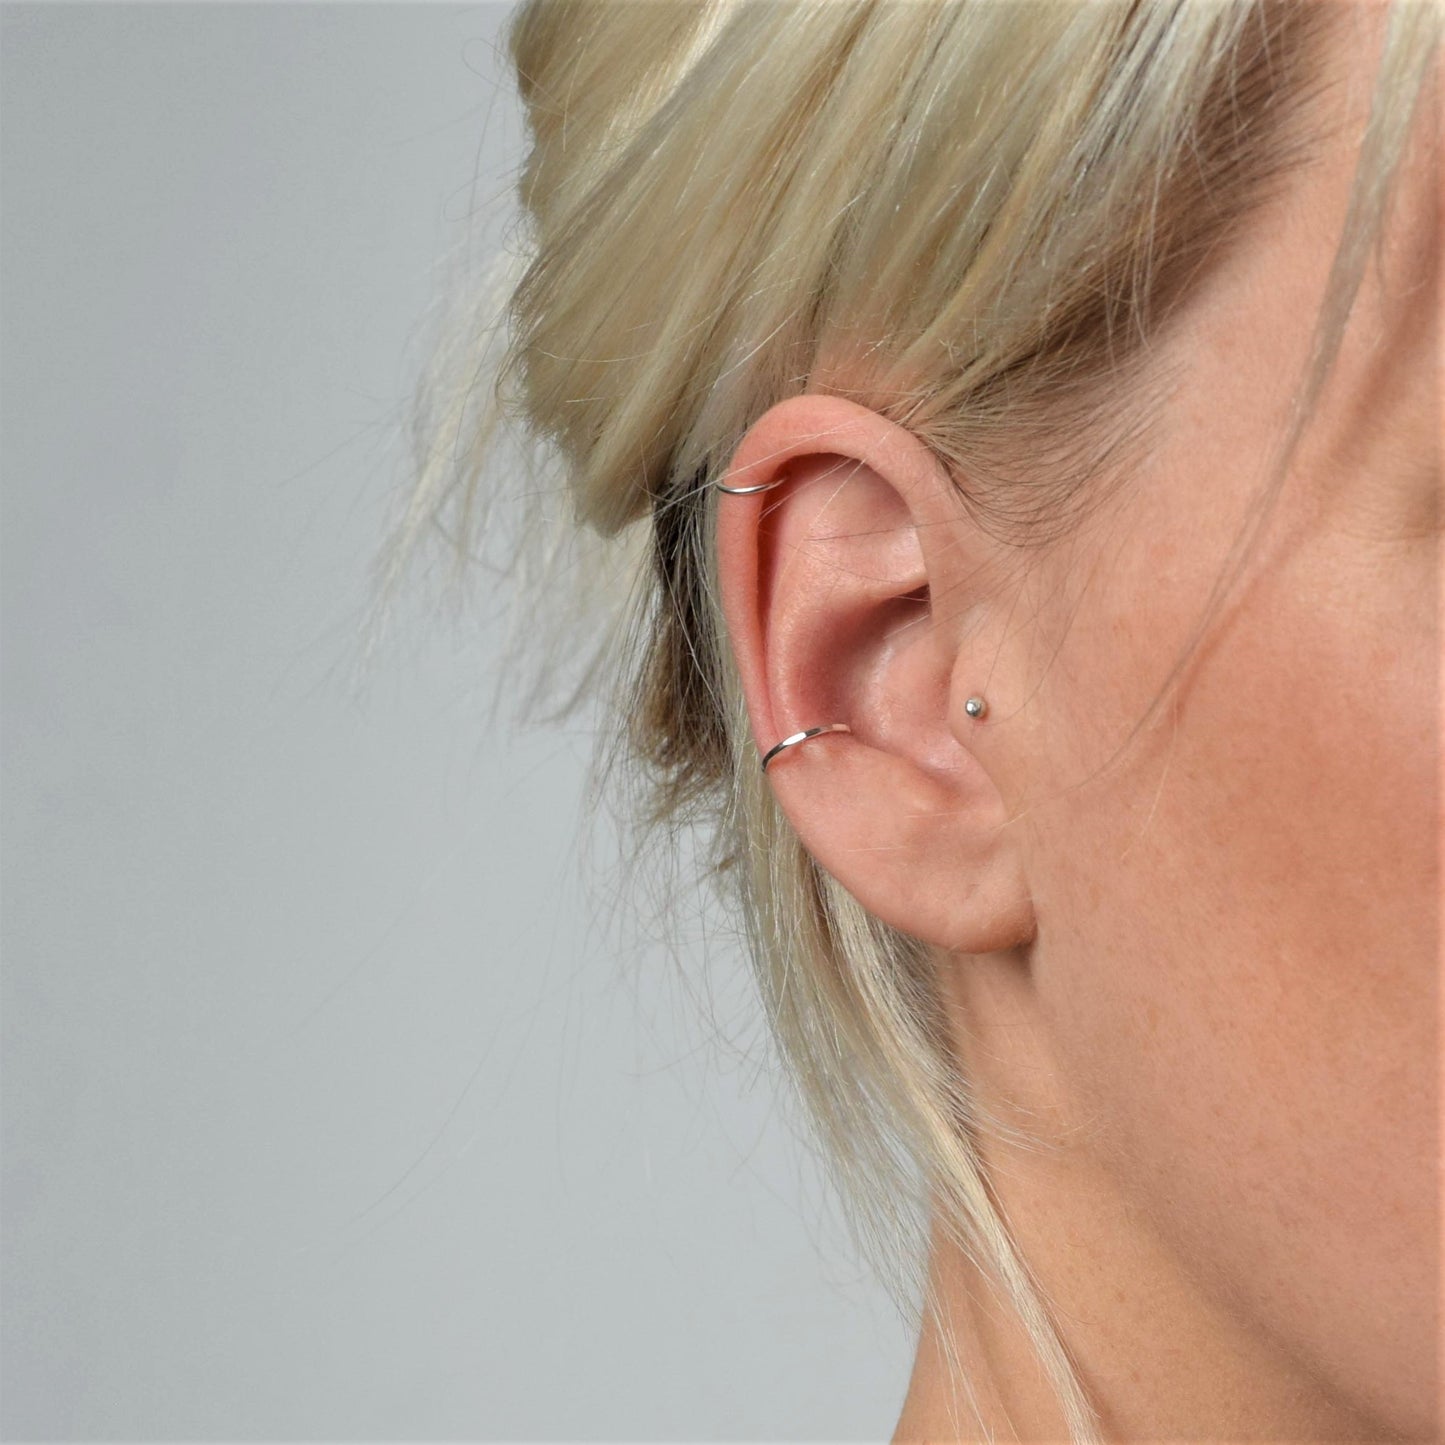 tragus stud work alongside conch and helix cuffs